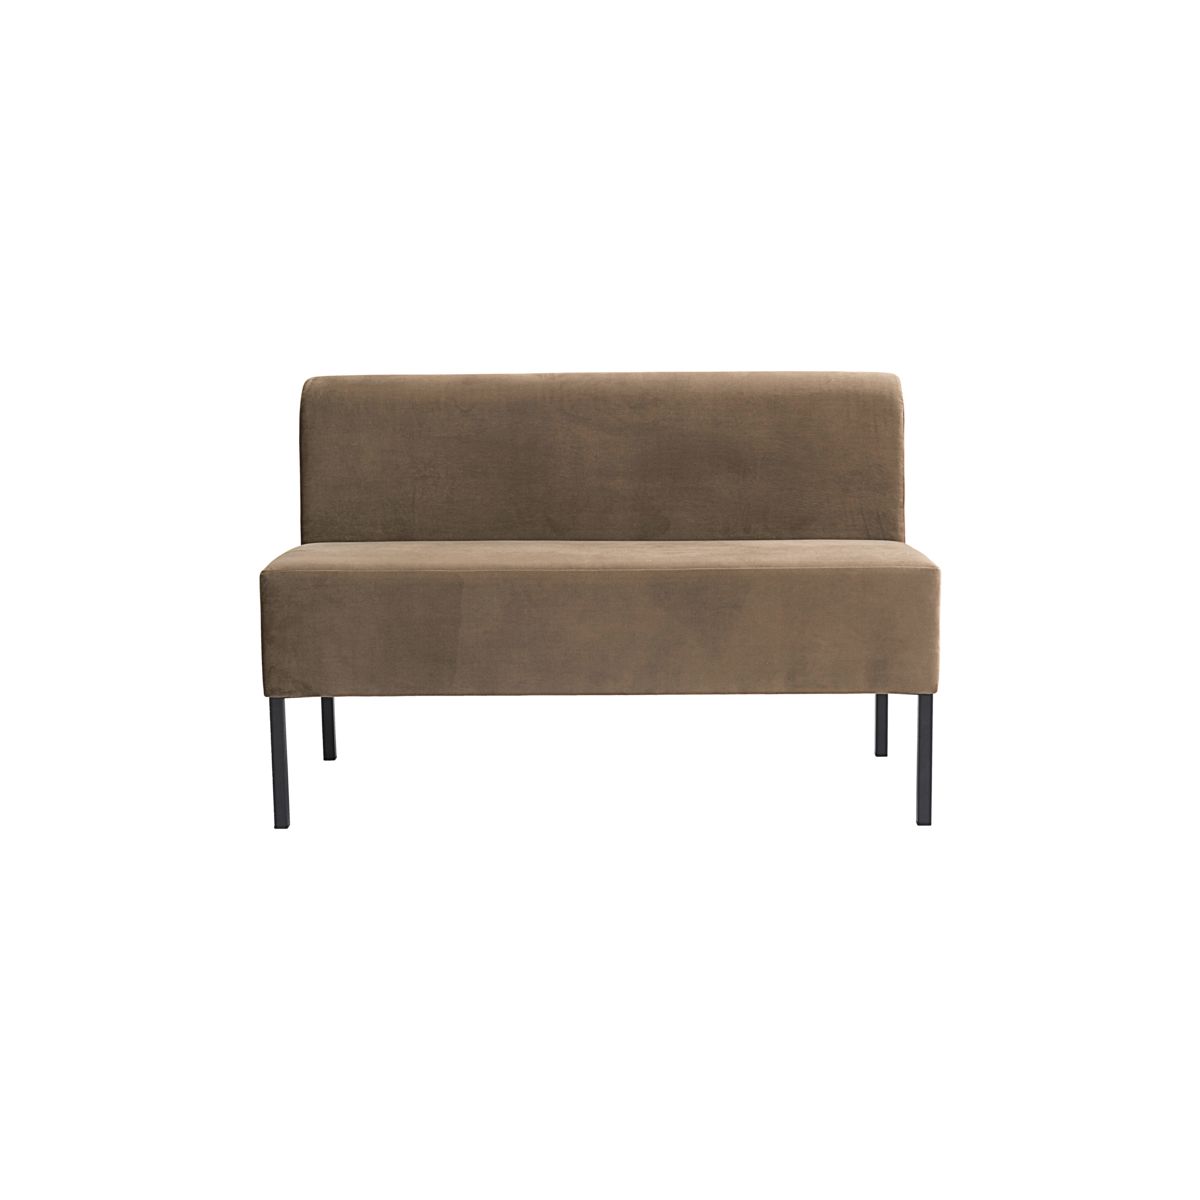 House Doctor Sofa 2 seater - sand 120